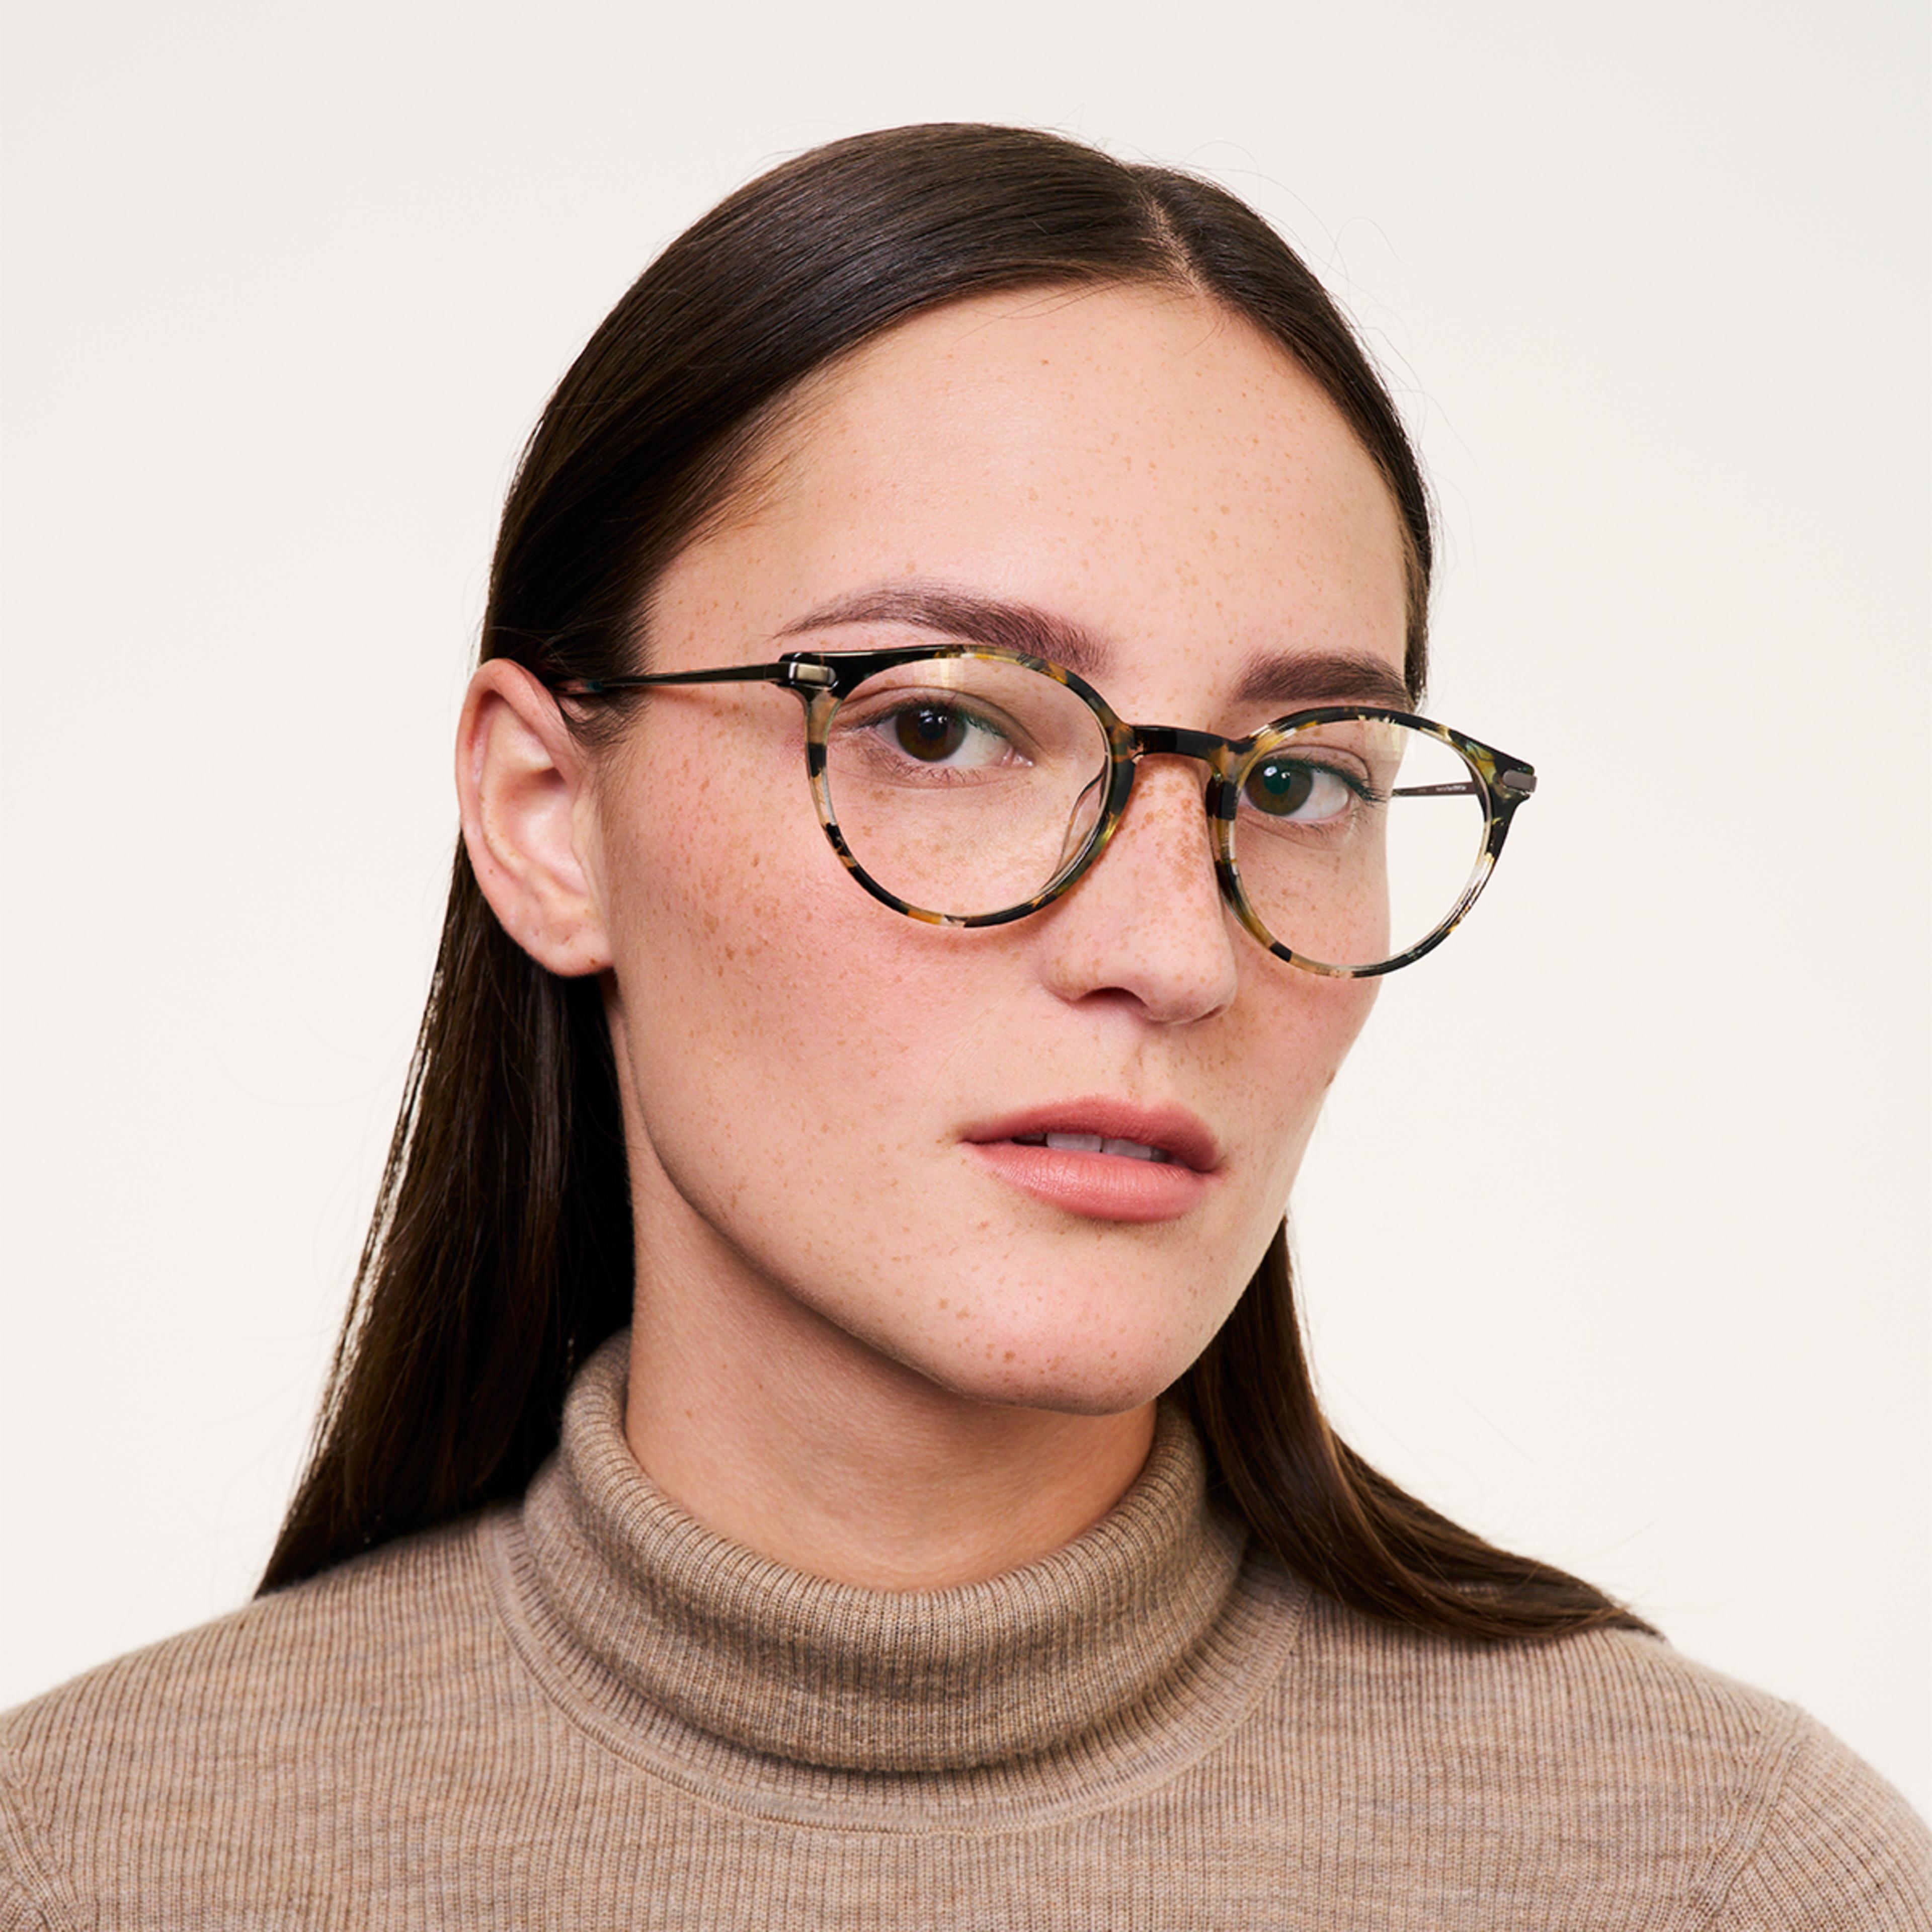 Ace & Tate Glasses | Round Metal in Grey